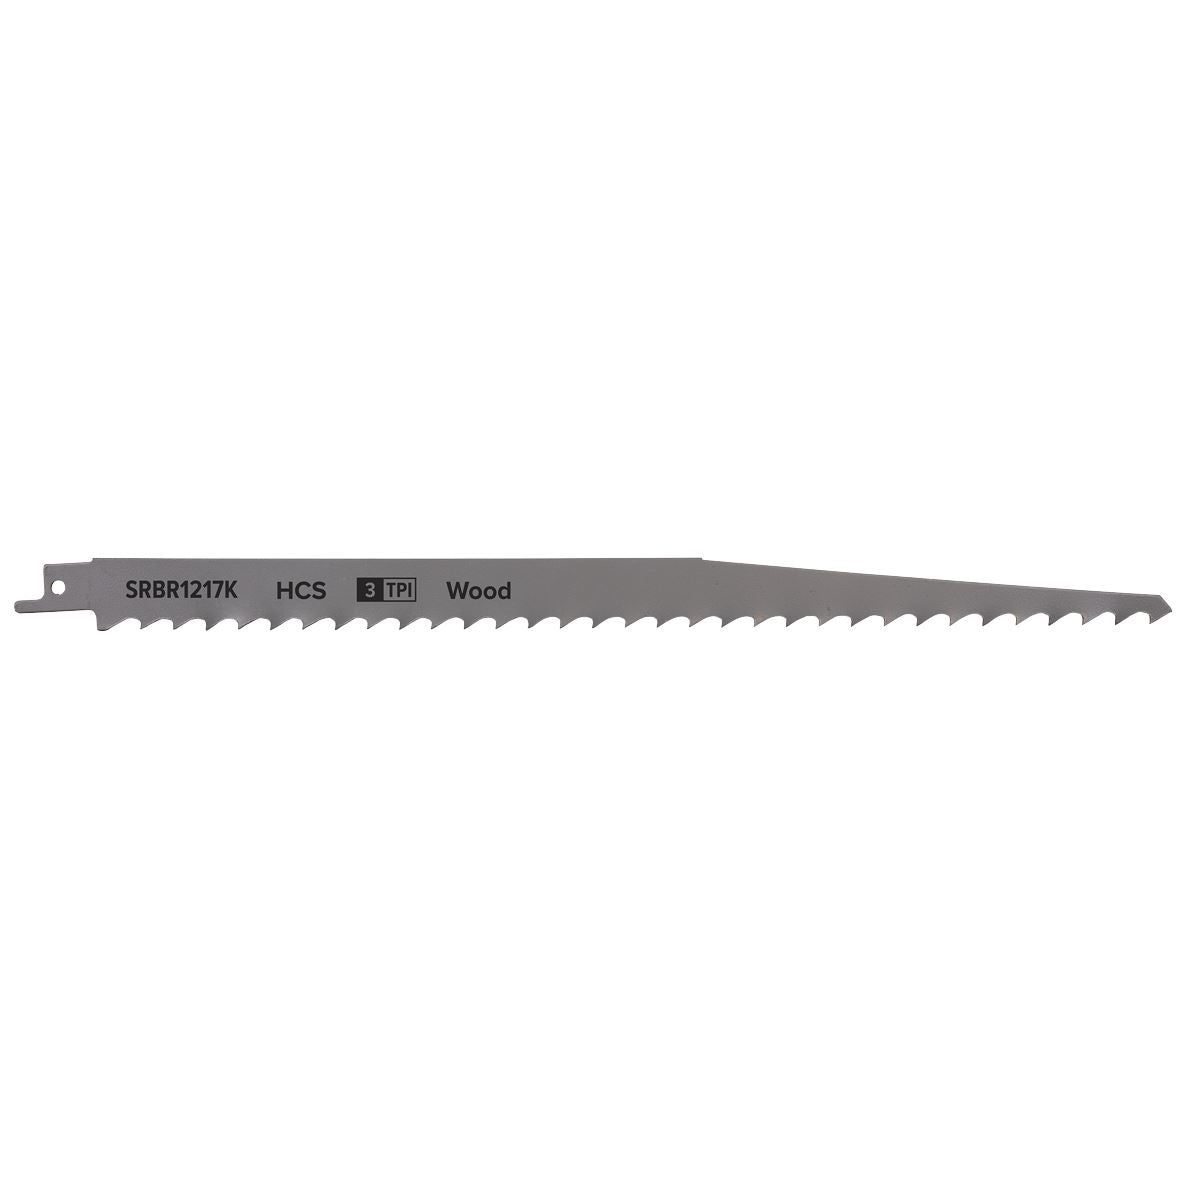 Sealey Reciprocating Saw Blade Pruning & Coarse Wood 300mm 3tpi - Pack of 5